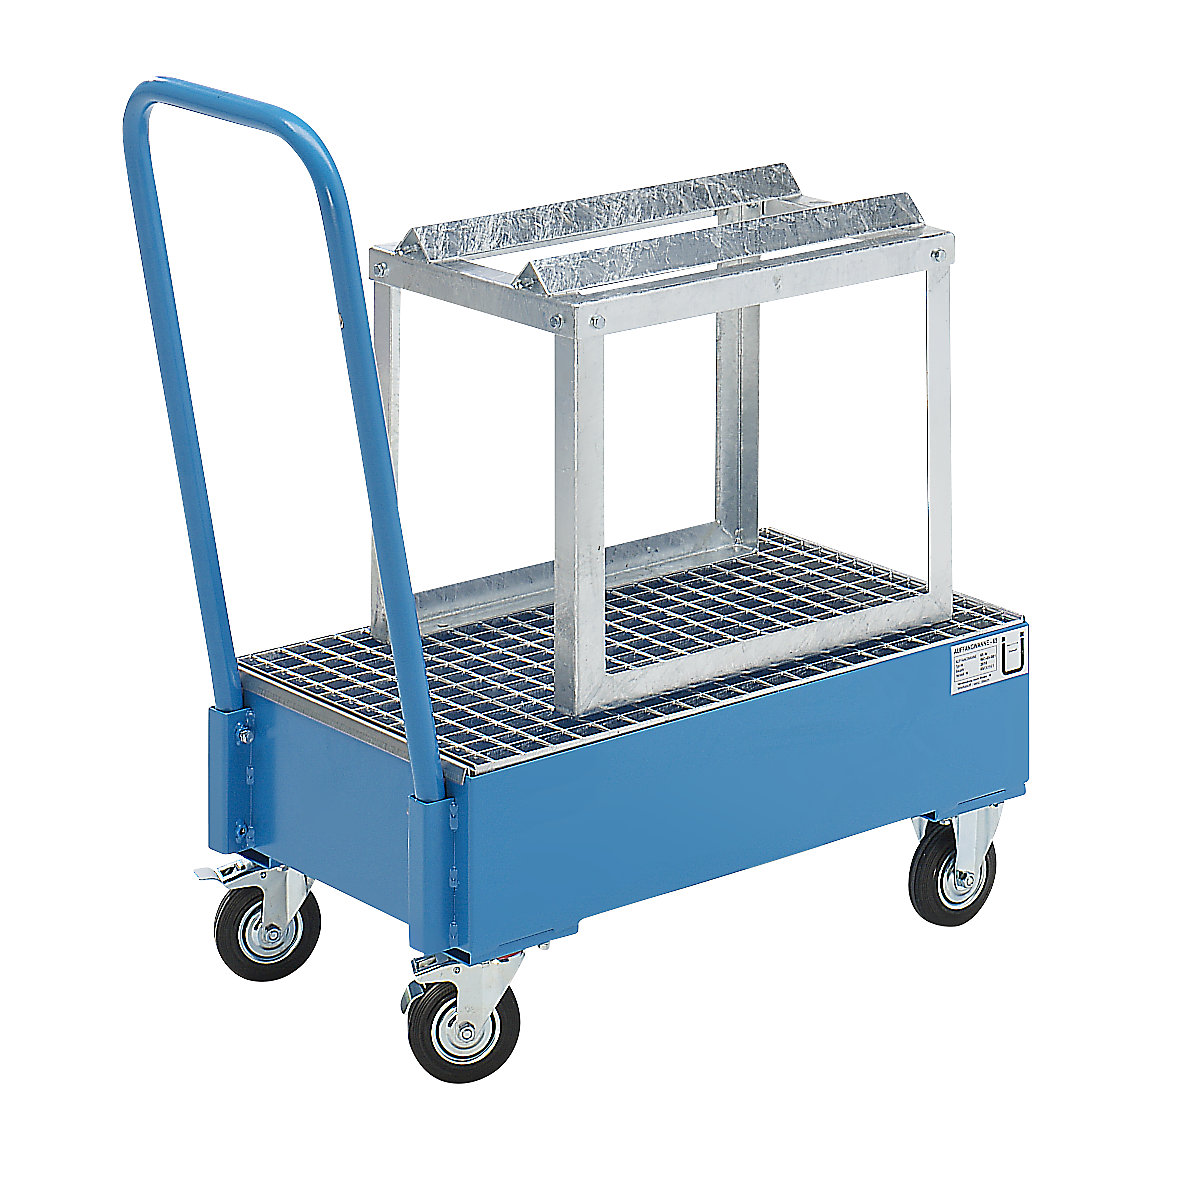 Mobile sump tray made of sheet steel – eurokraft basic, LxW 800 x 500 mm, 1 x 60 l horizontal drum, blue RAL 5012-3